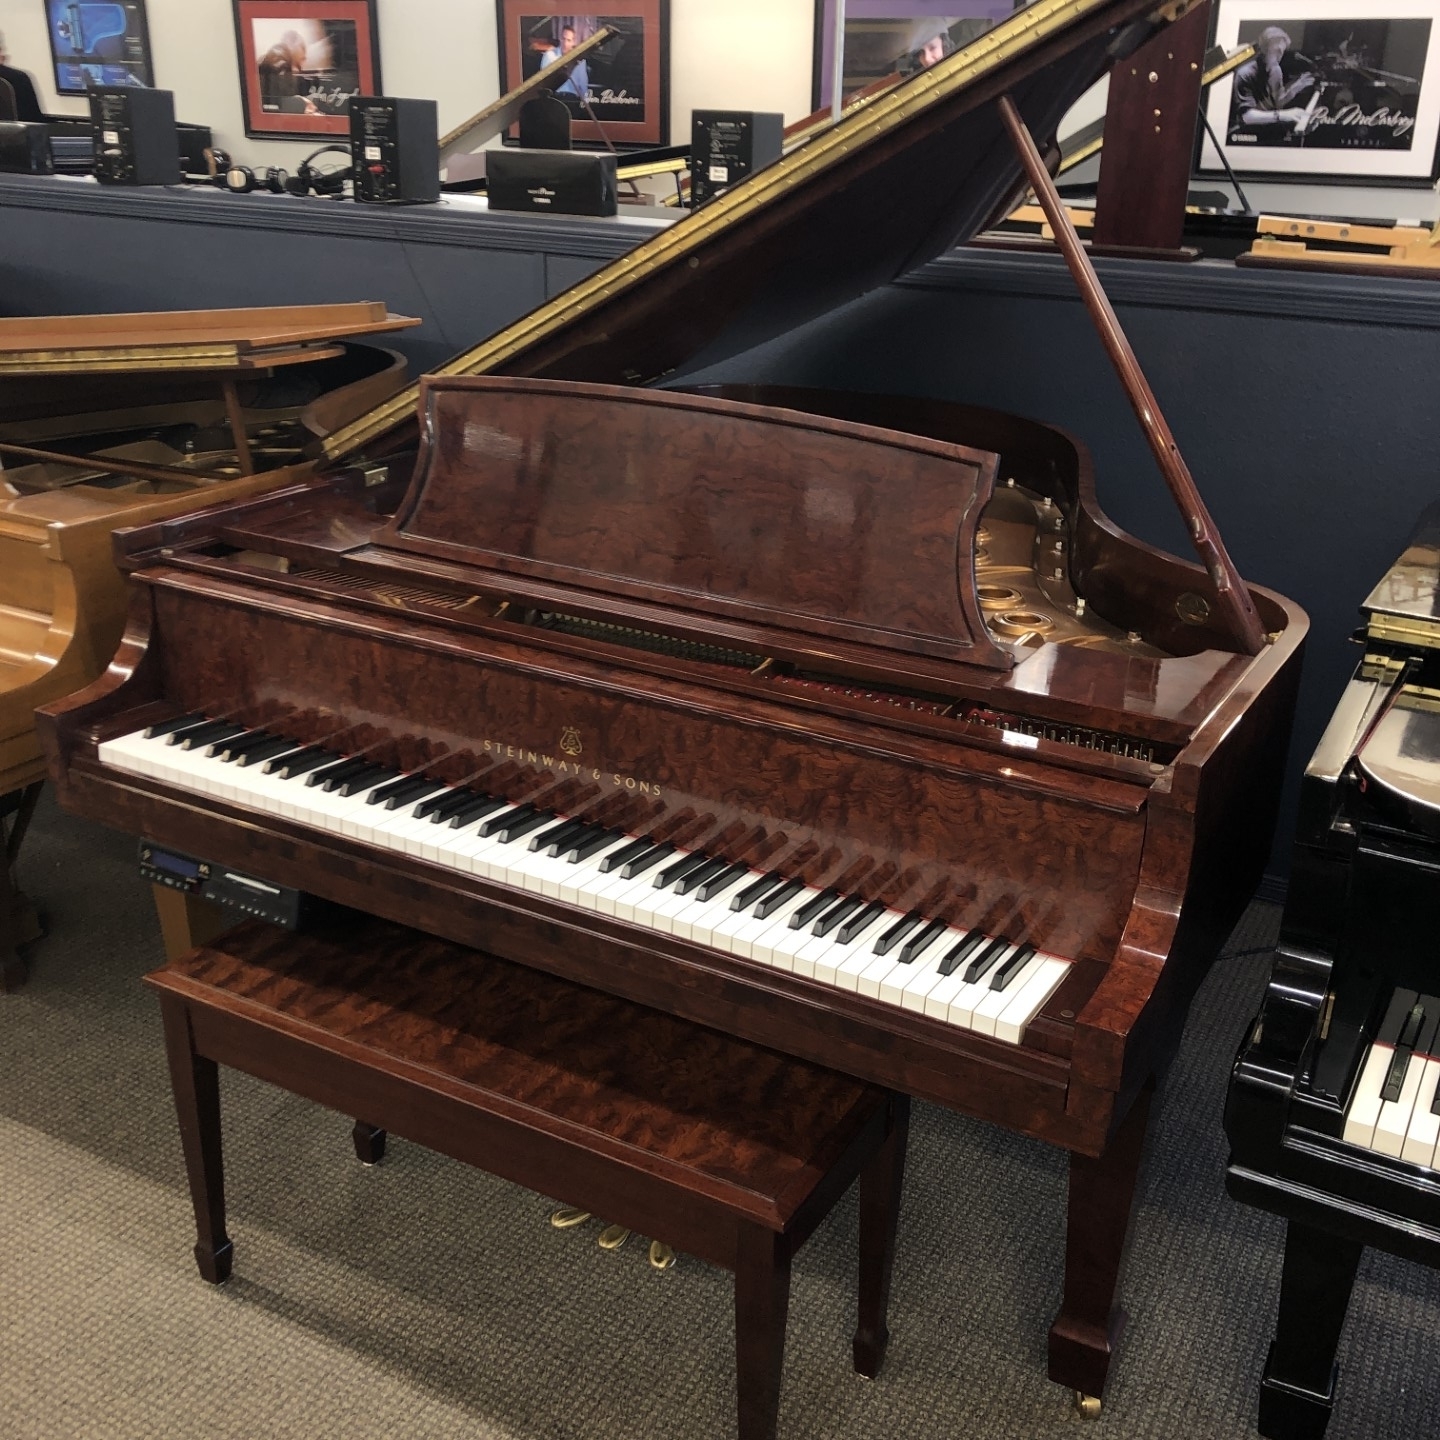 Image forSteinway & Sons “L” – Crown Jewel Collection